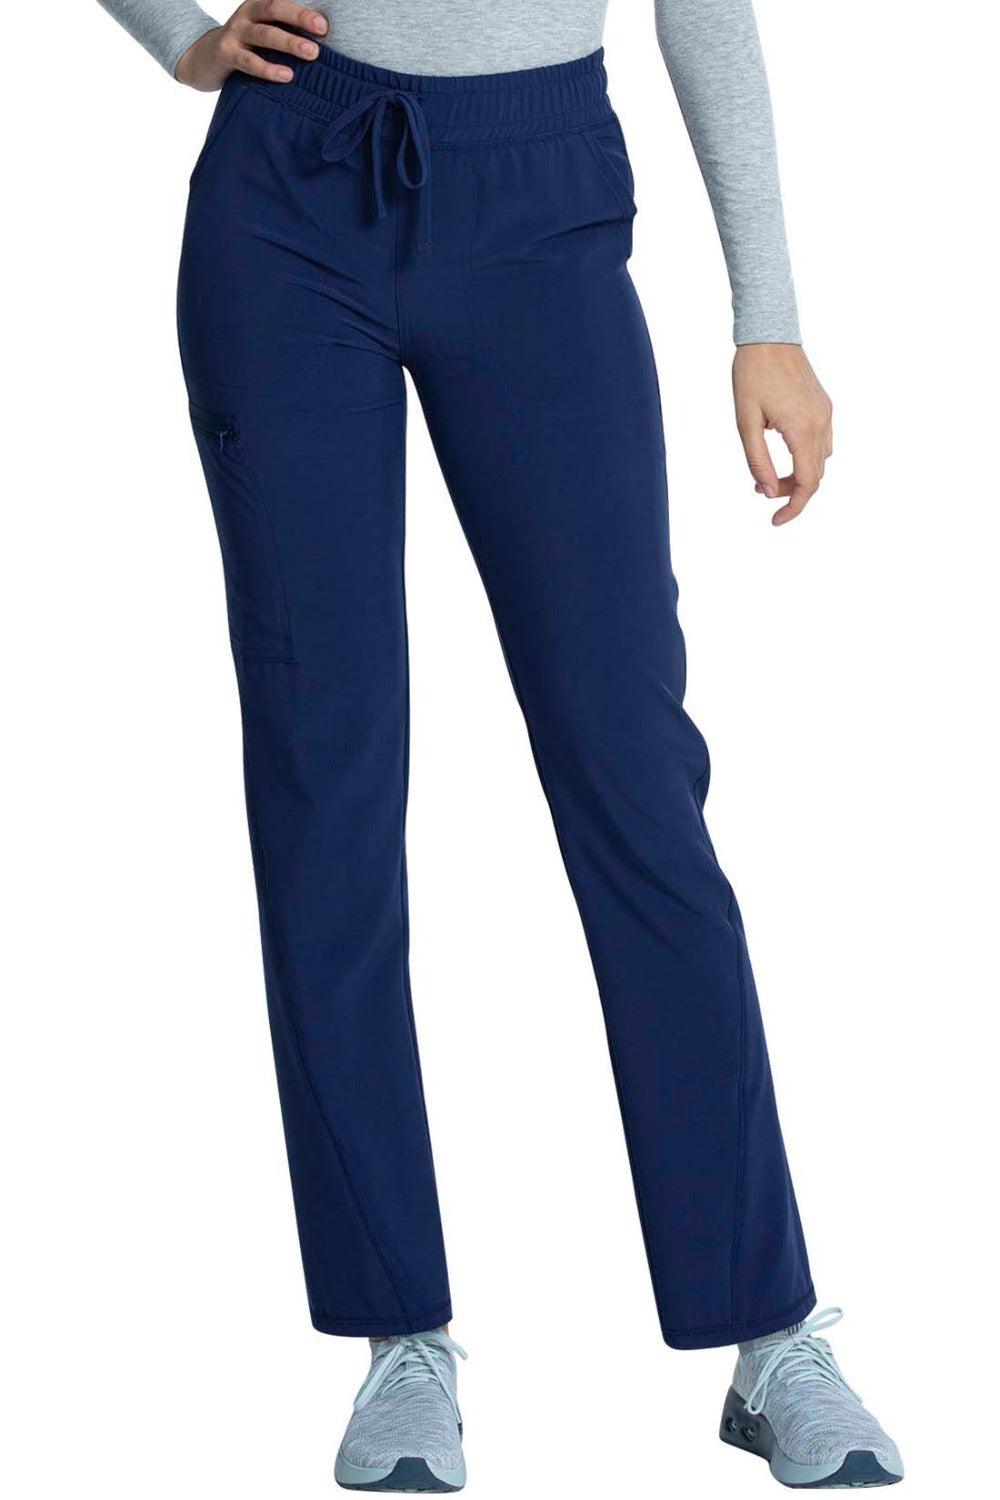 Cherokee Allura Tall Scrub Pant Mid Rise Tapered Leg Drawstring in Navy at Parker's Clothing and Shoes.